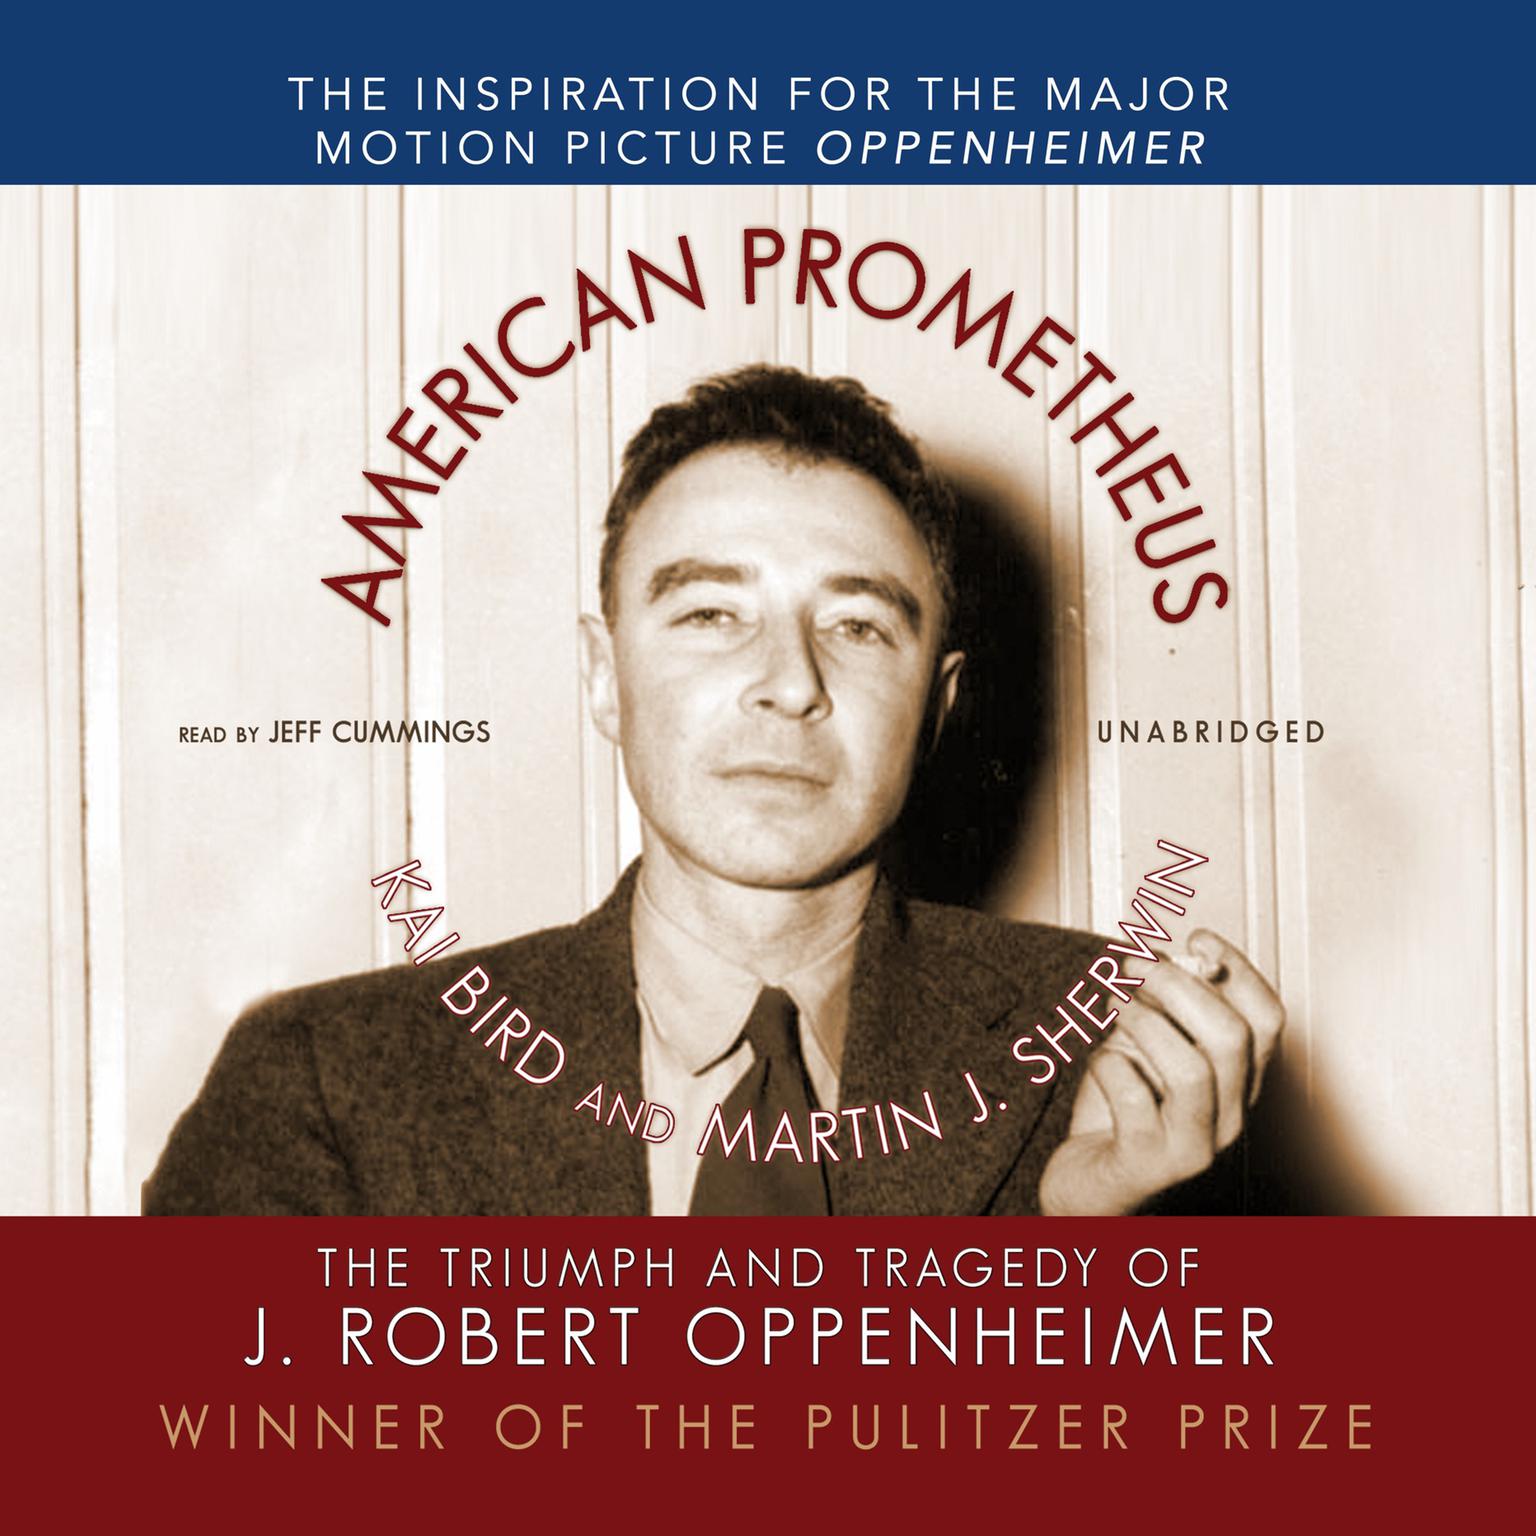 American Prometheus: The Triumph and Tragedy of J. Robert Oppenheimer Audiobook, by Kai Bird